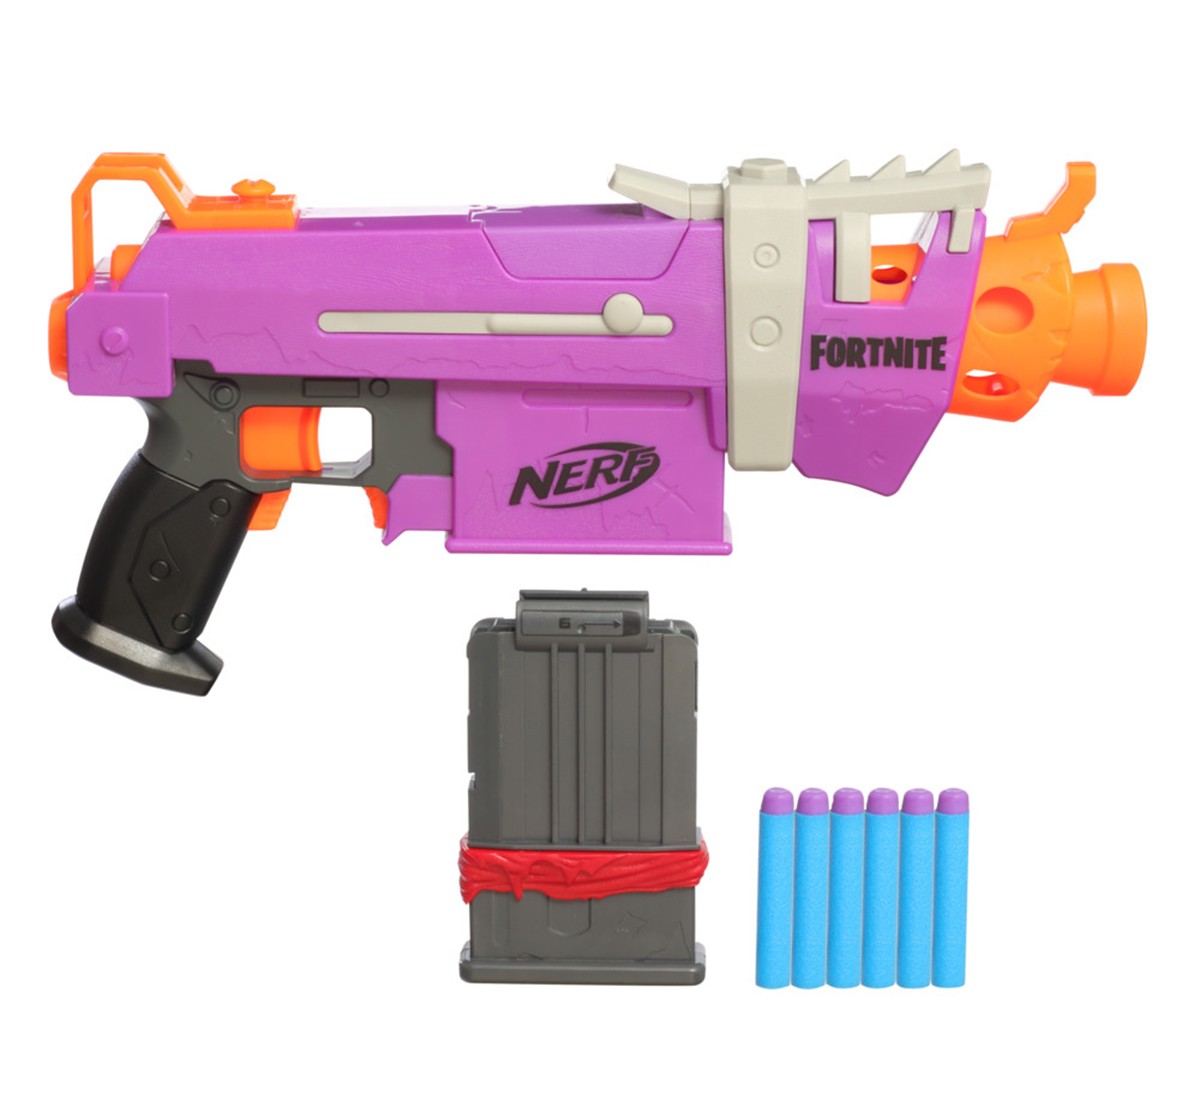 NERF Fortnite AR-L Elite Dart Blaster - Motorized Toy Blaster, 20 Official  Fortnite Elite Darts, Flip Up Sights - for Youth, Teens, Adults, Brown